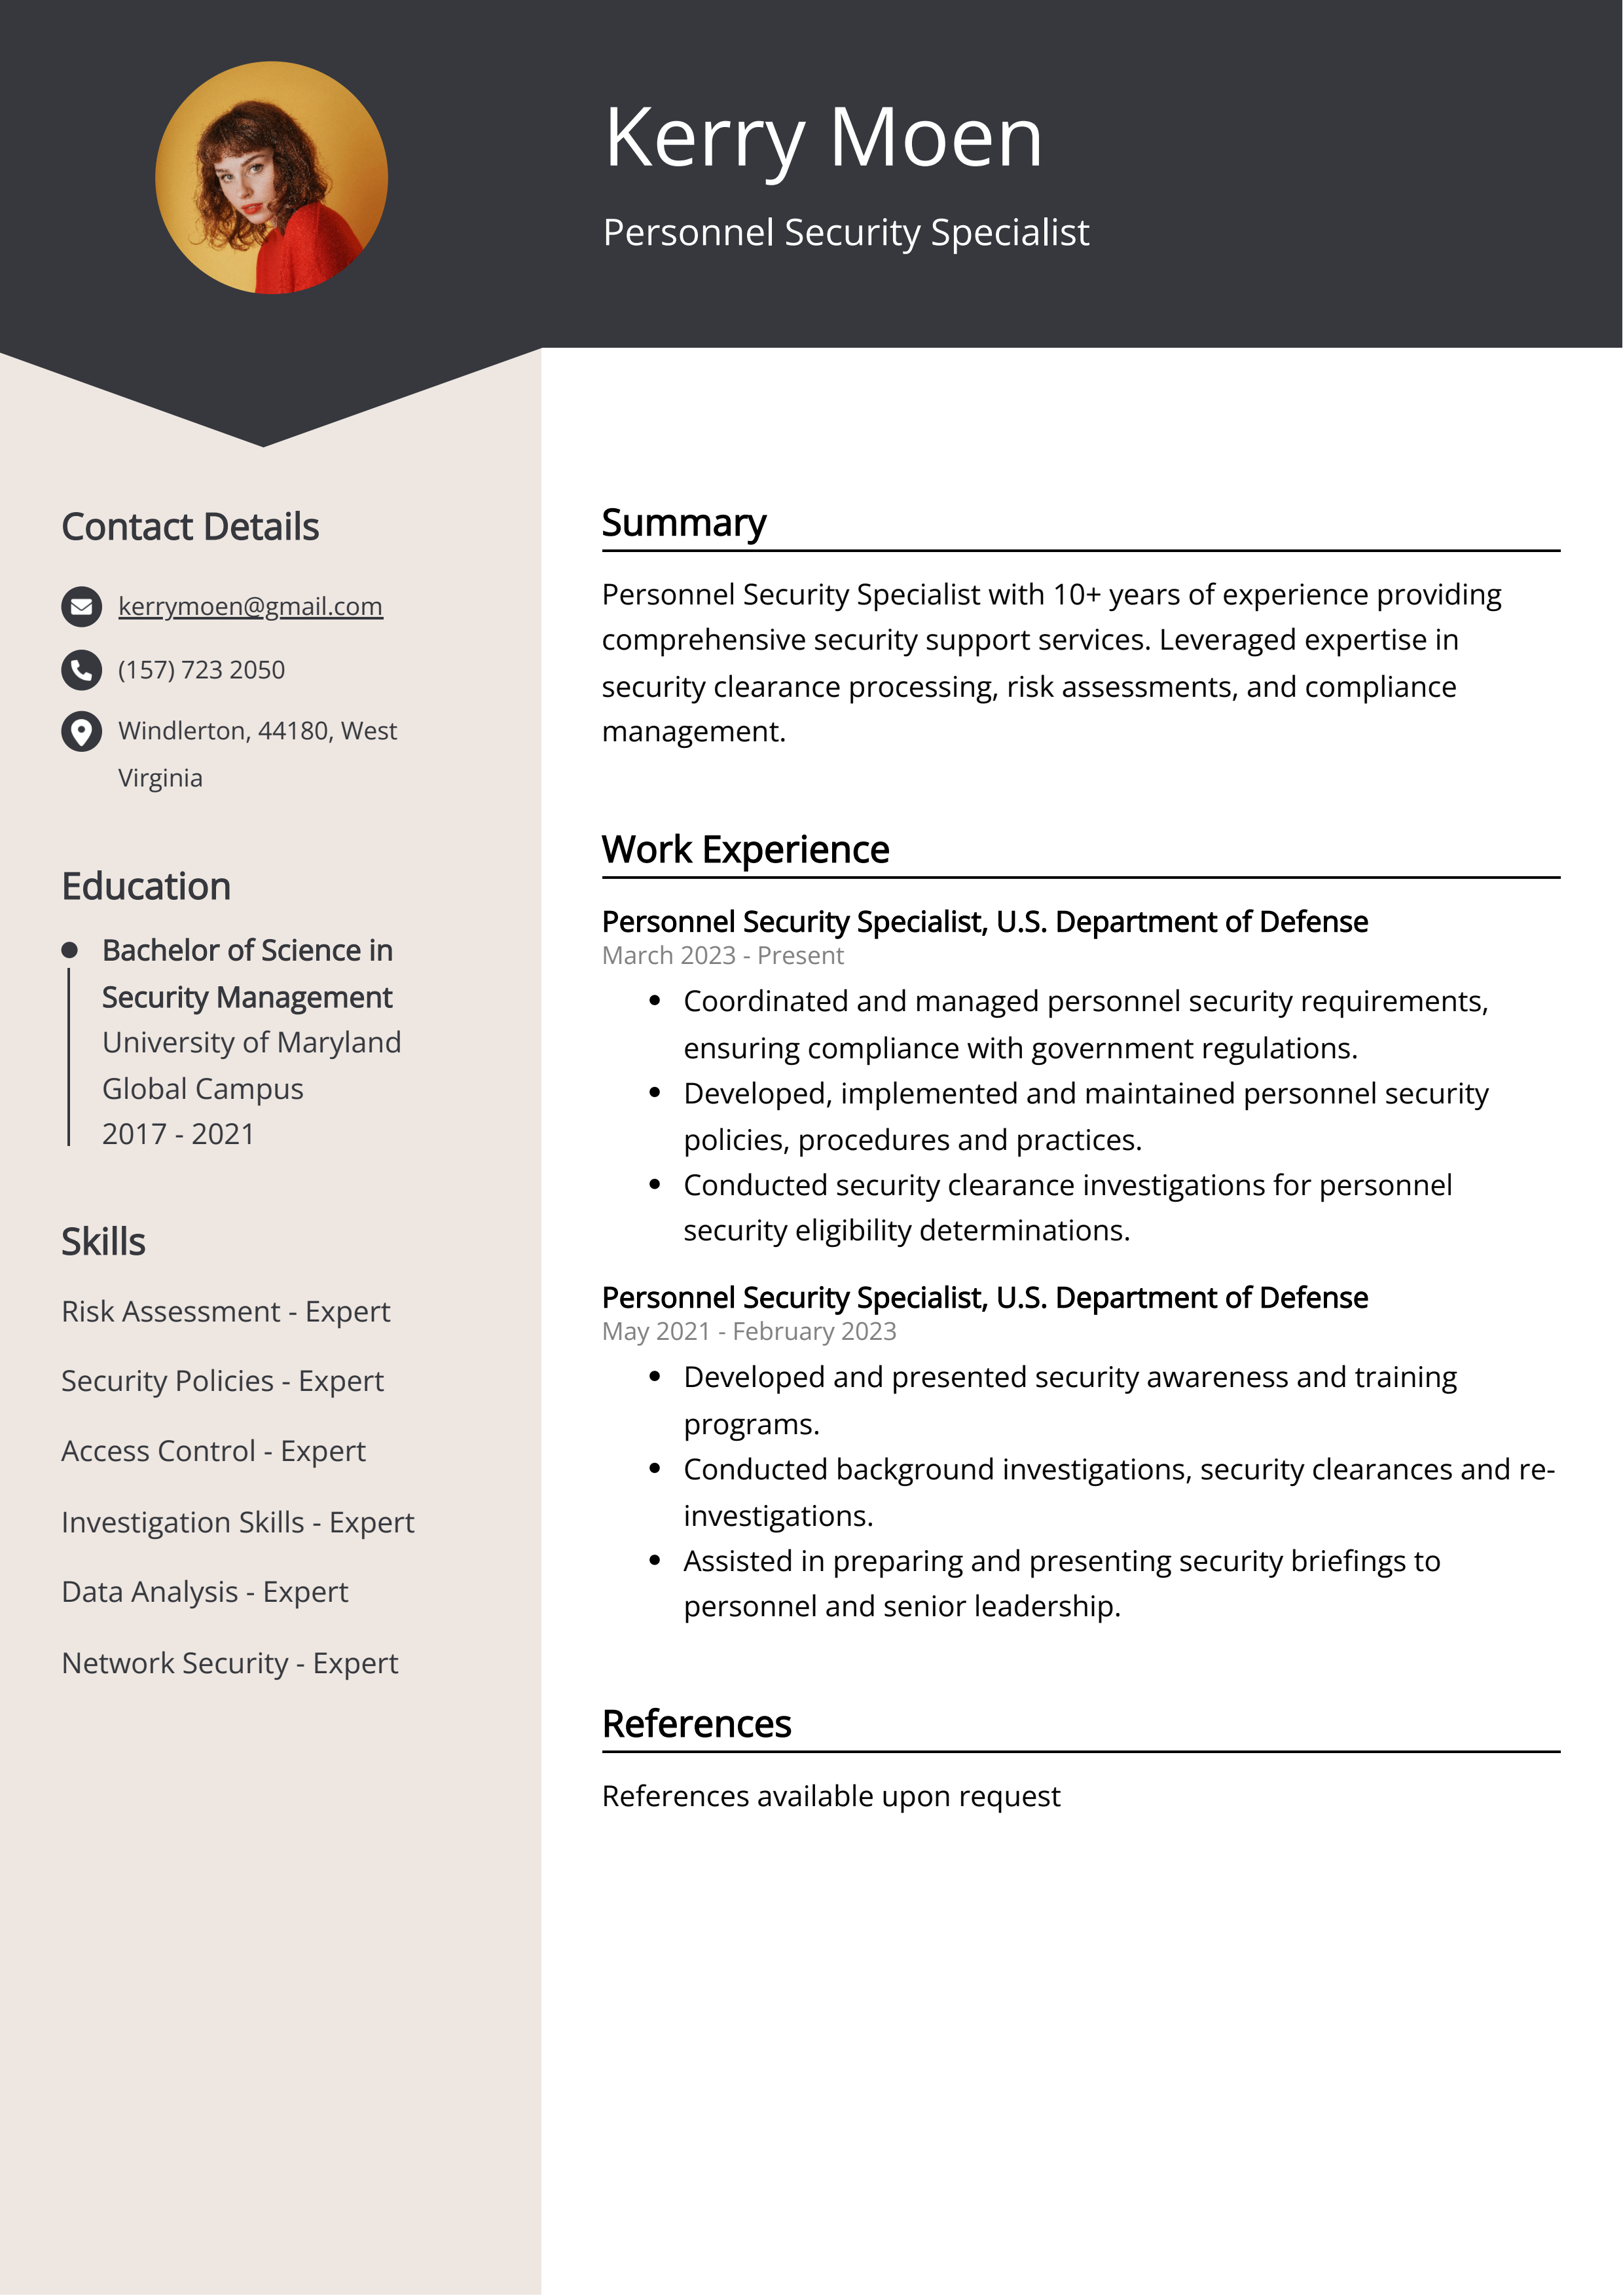 Personnel Security Specialist CV Example